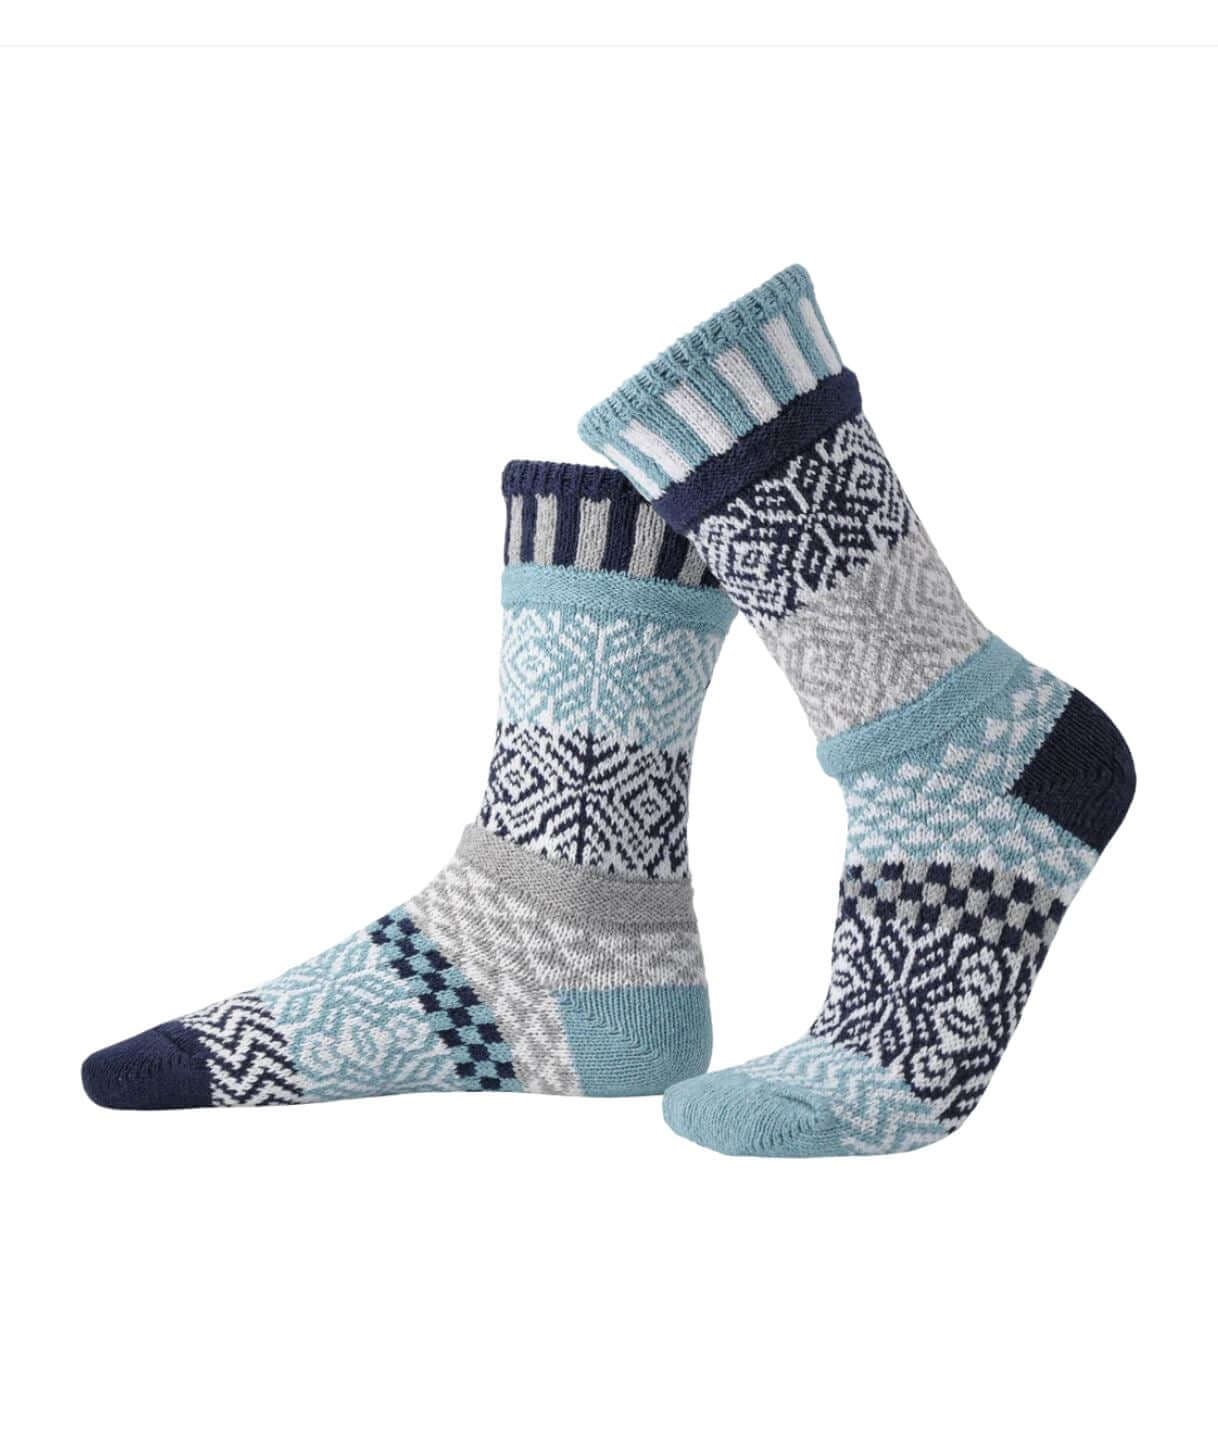 Solmate Socks SNOWFALL Knitted Crew Socks Proudly Made USA | These socks are delightfully mismatched & so very comfortable. American Made Clothing